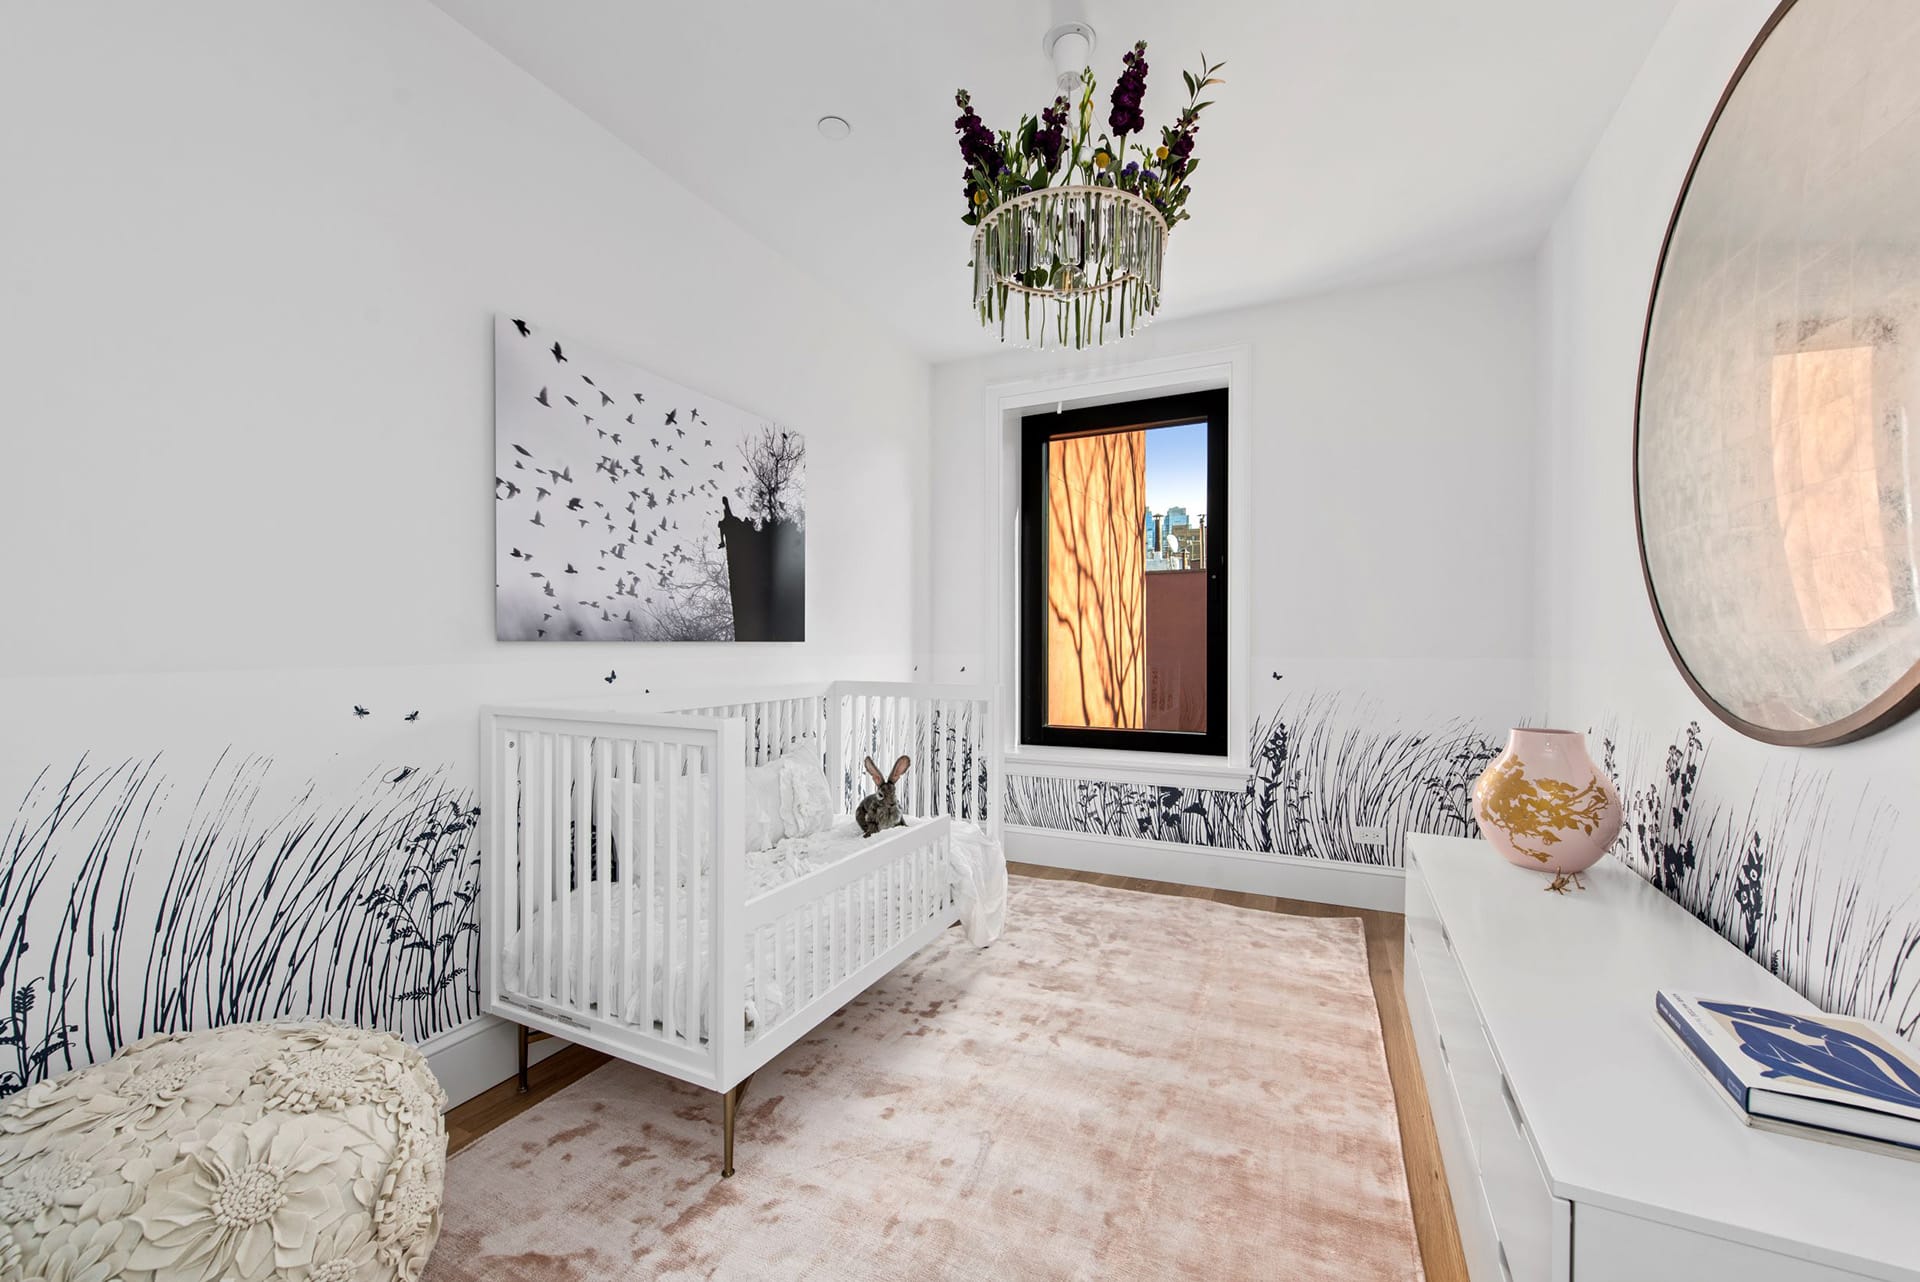 Nursery with a dusty rose carpet, white crib, wallpaper with wheat fields at the bottom, white dresser, circular mirror, flower-covered chandelier, and wood floors.